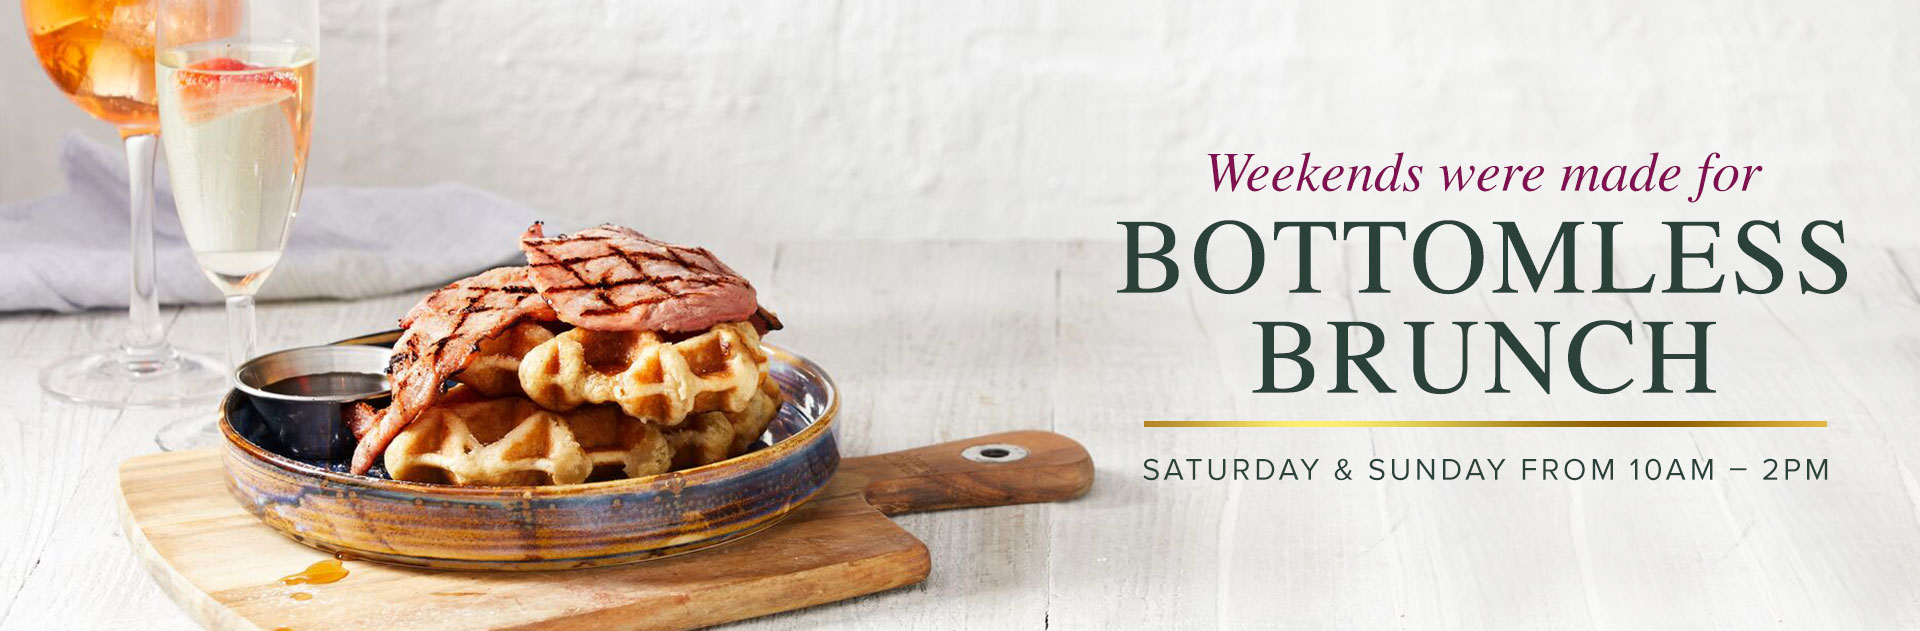 Ember Inns The Essex Arms bottomless brunch of bacon, waffles and drinks